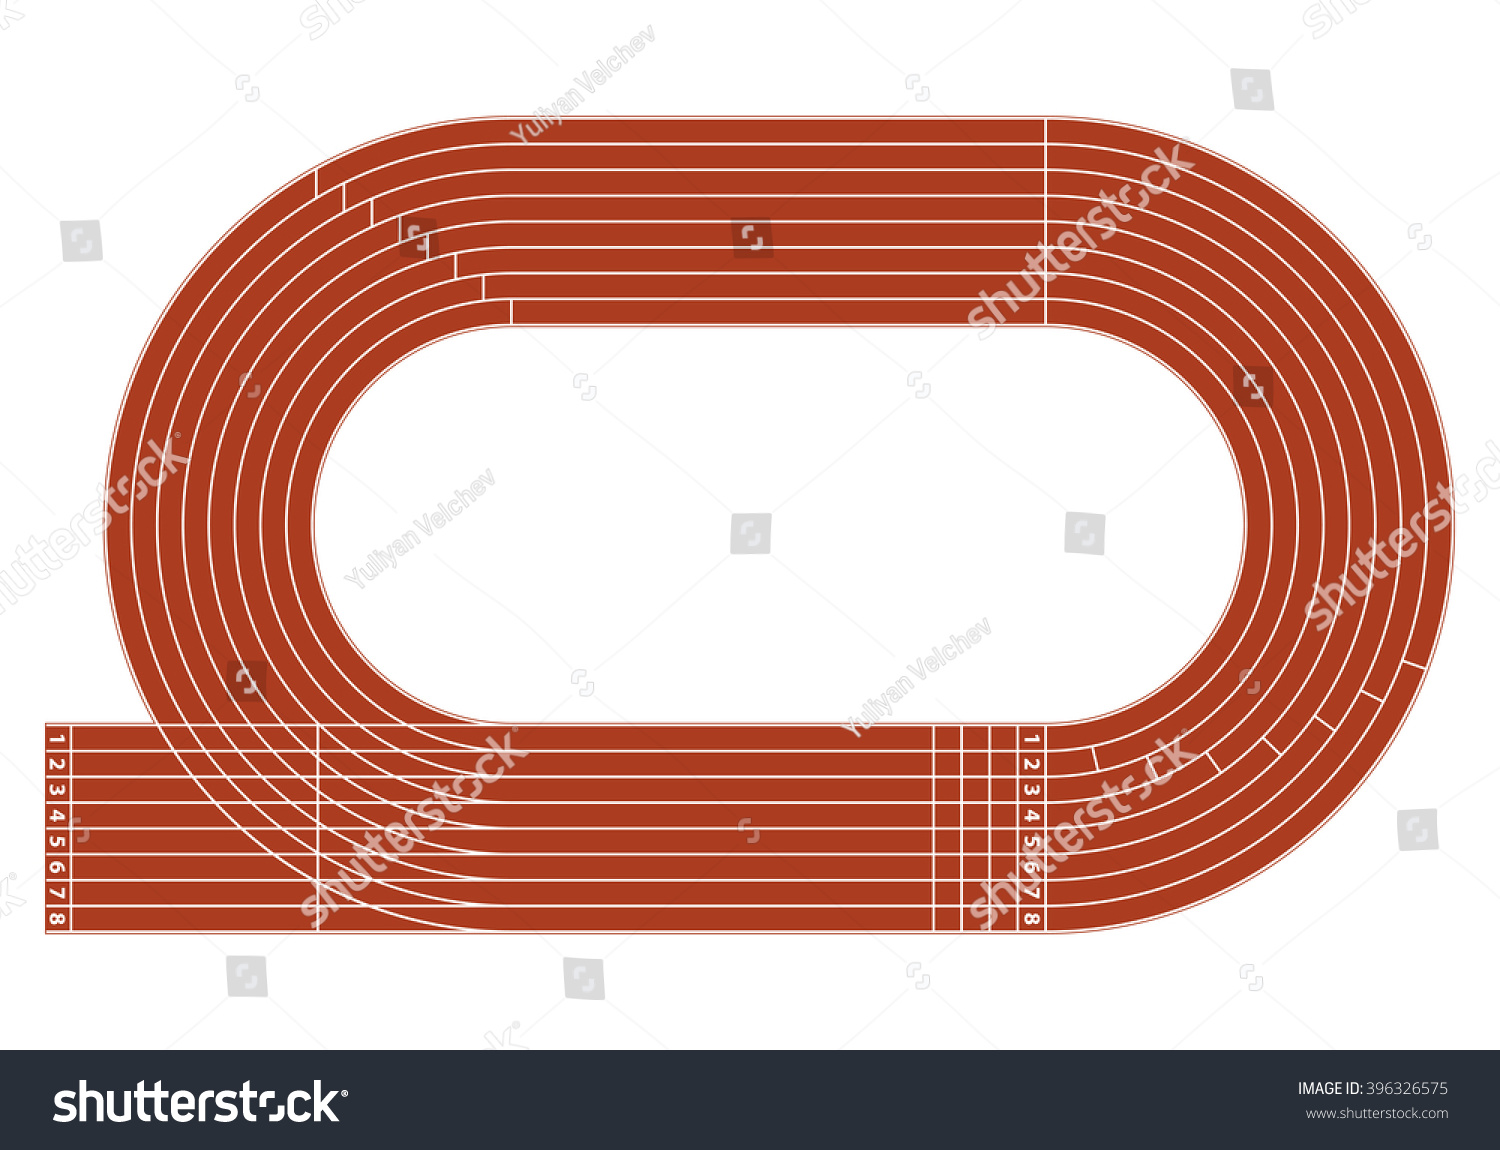 Track And Field Labelled Diagram